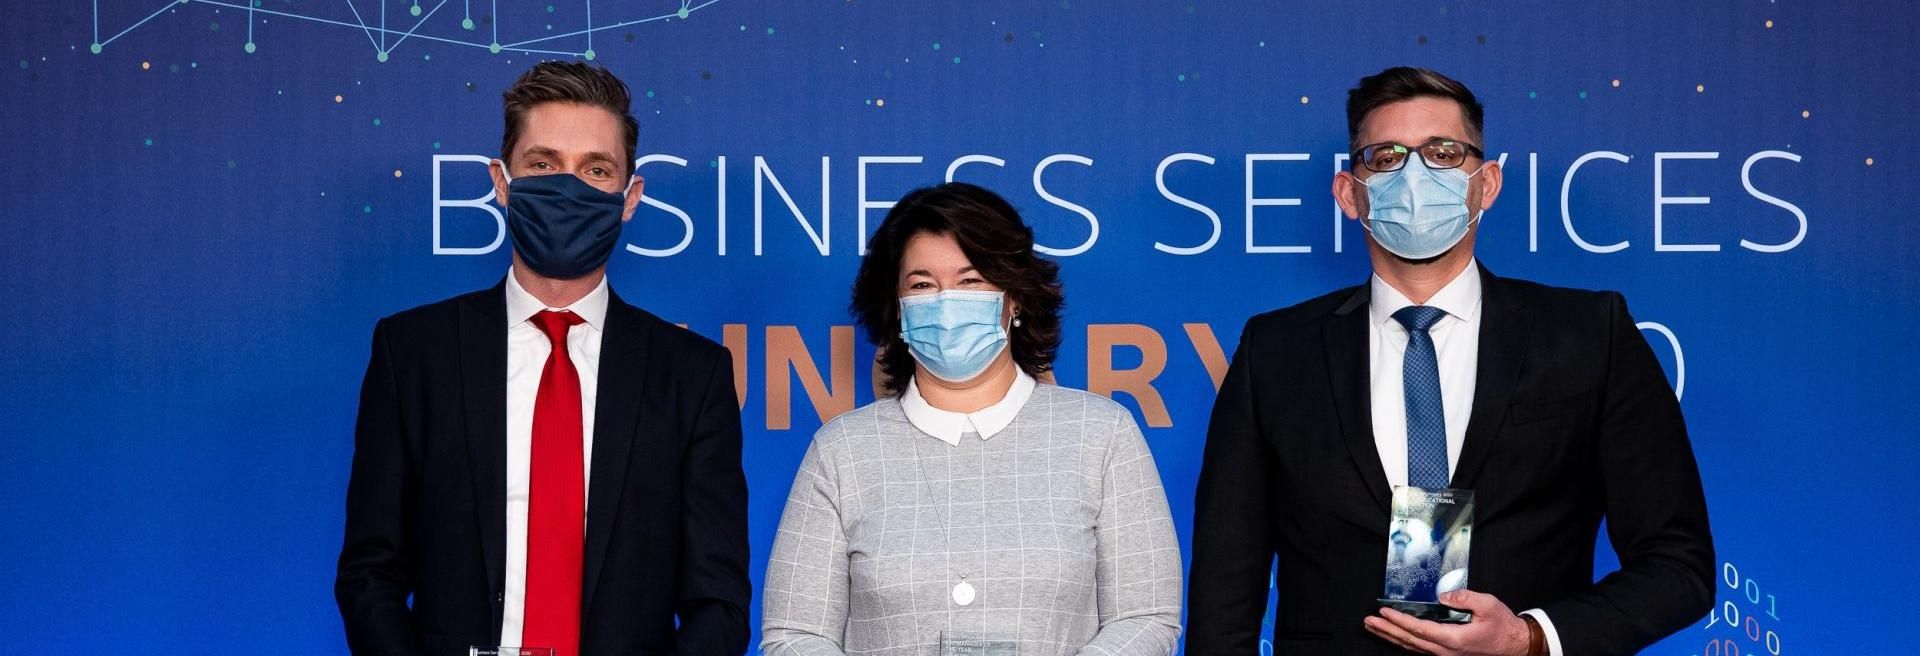 Business Services Hungary 2020: Key industry trends and tendencies after the pandemic - VIDEO